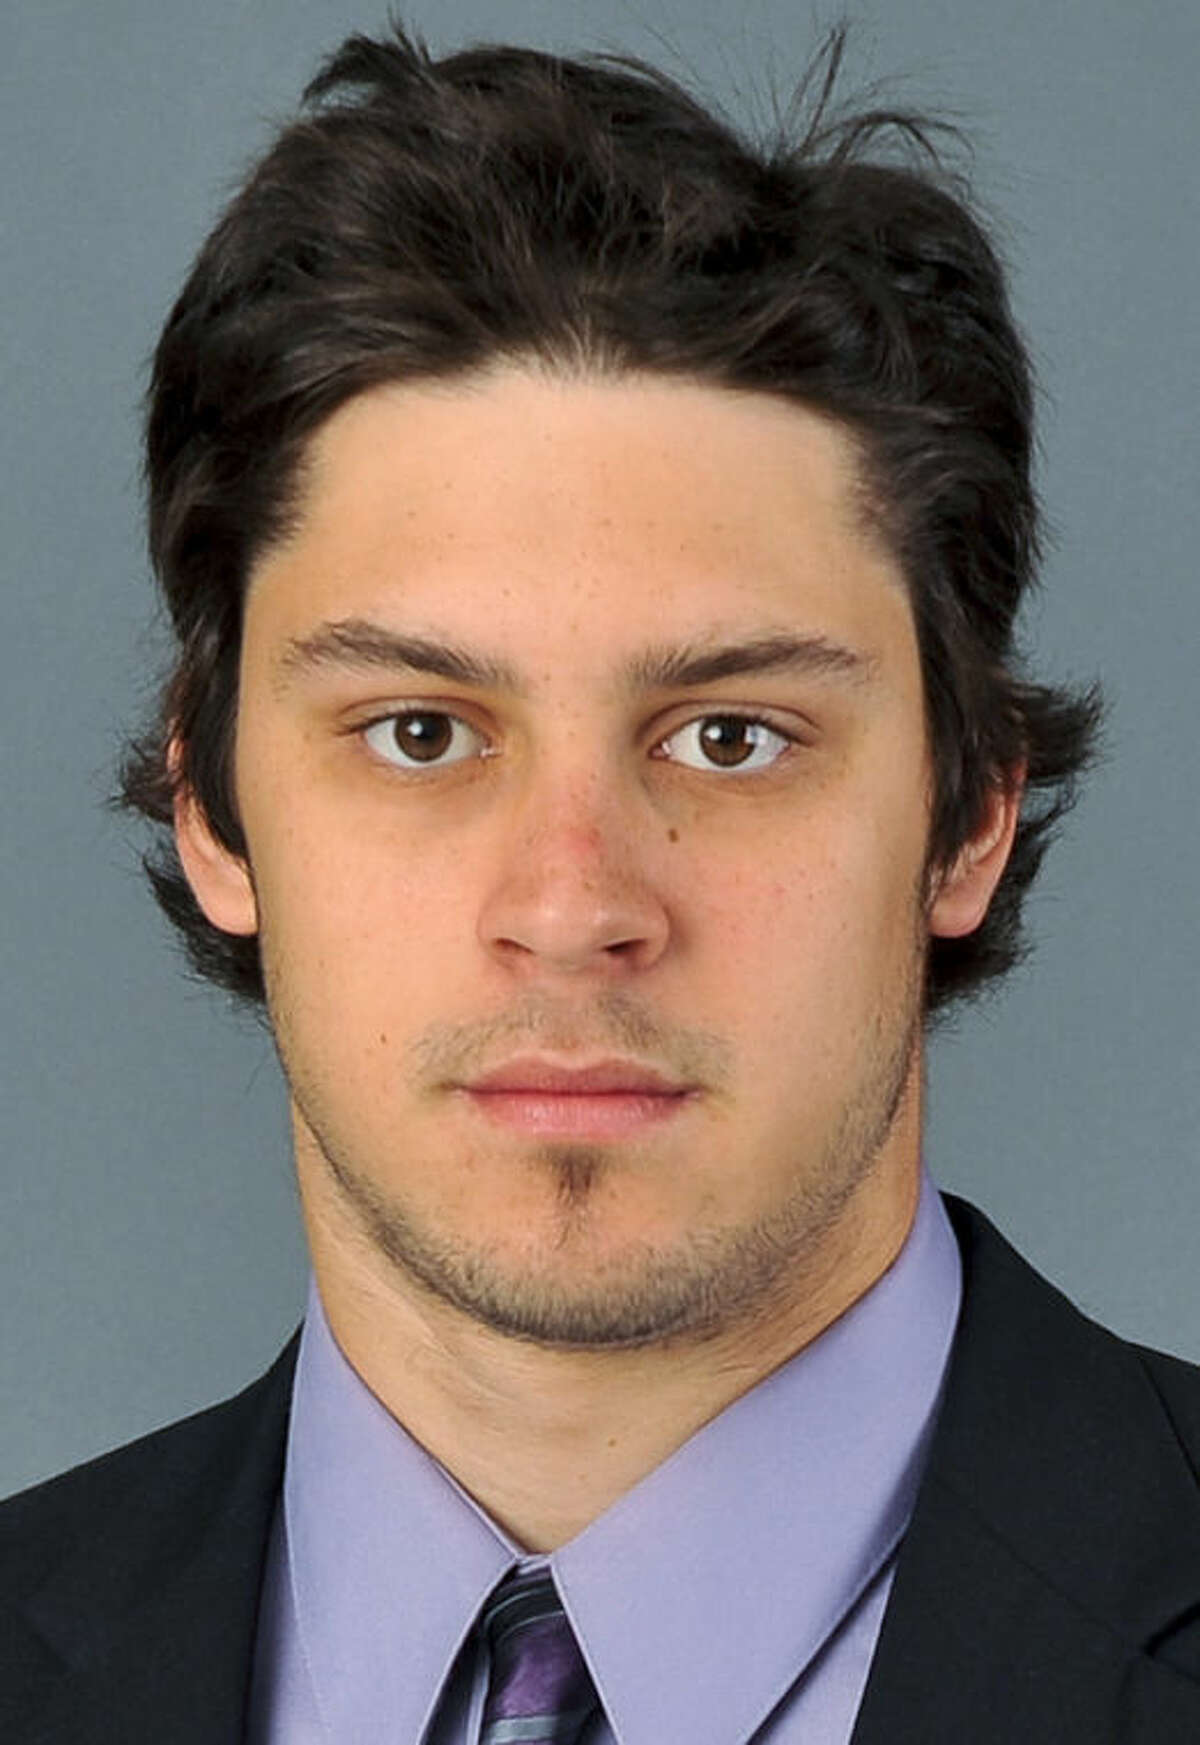 In an Aug. 29, 2010, photo provided by Quinnipiac University, Quinnipiac goalie Eric Hartzell poses for a photo in Hamden. Conn. The Bobcats are 18-3-3, unbeaten in their last 17 games and ranked second in the nation on Jan. 29. Hartzell leads the nation with a goals-against average of 1.46. (AP Photo/Quinnipiac University, John Hassett)